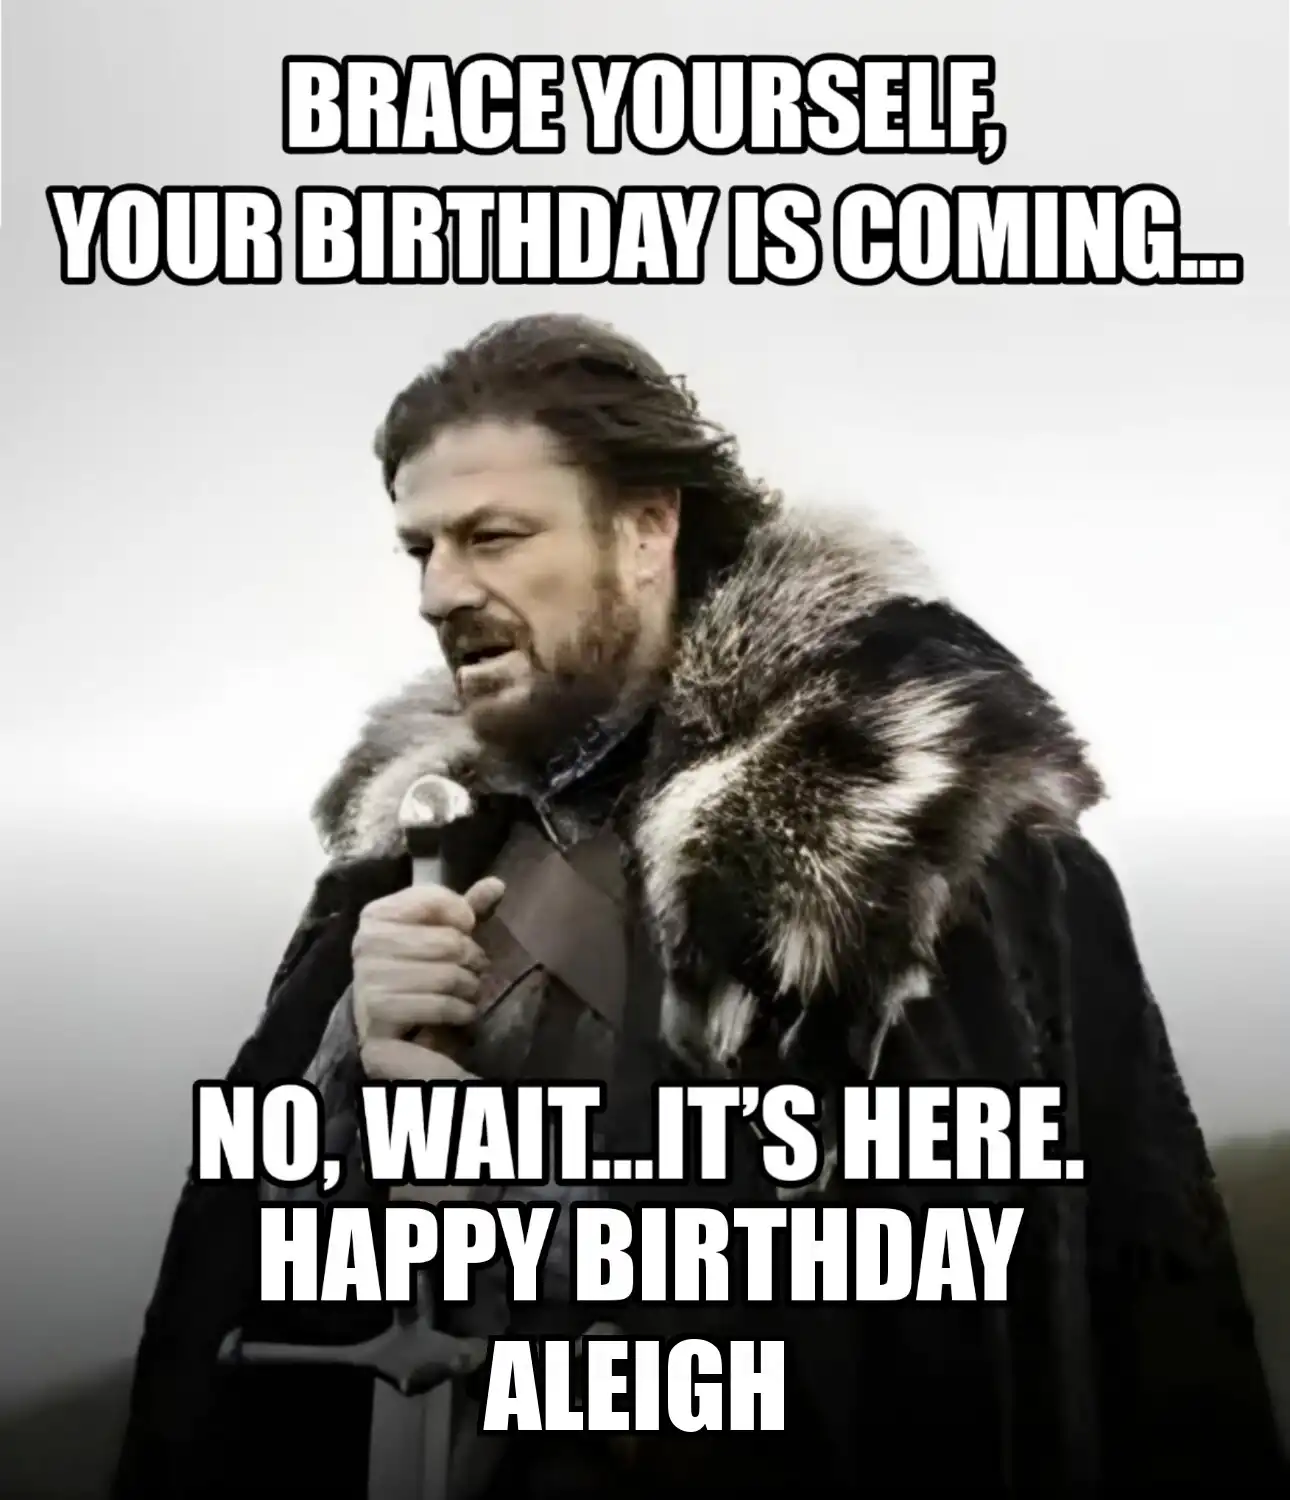 Happy Birthday Aleigh Brace Yourself Your Birthday Is Coming Meme